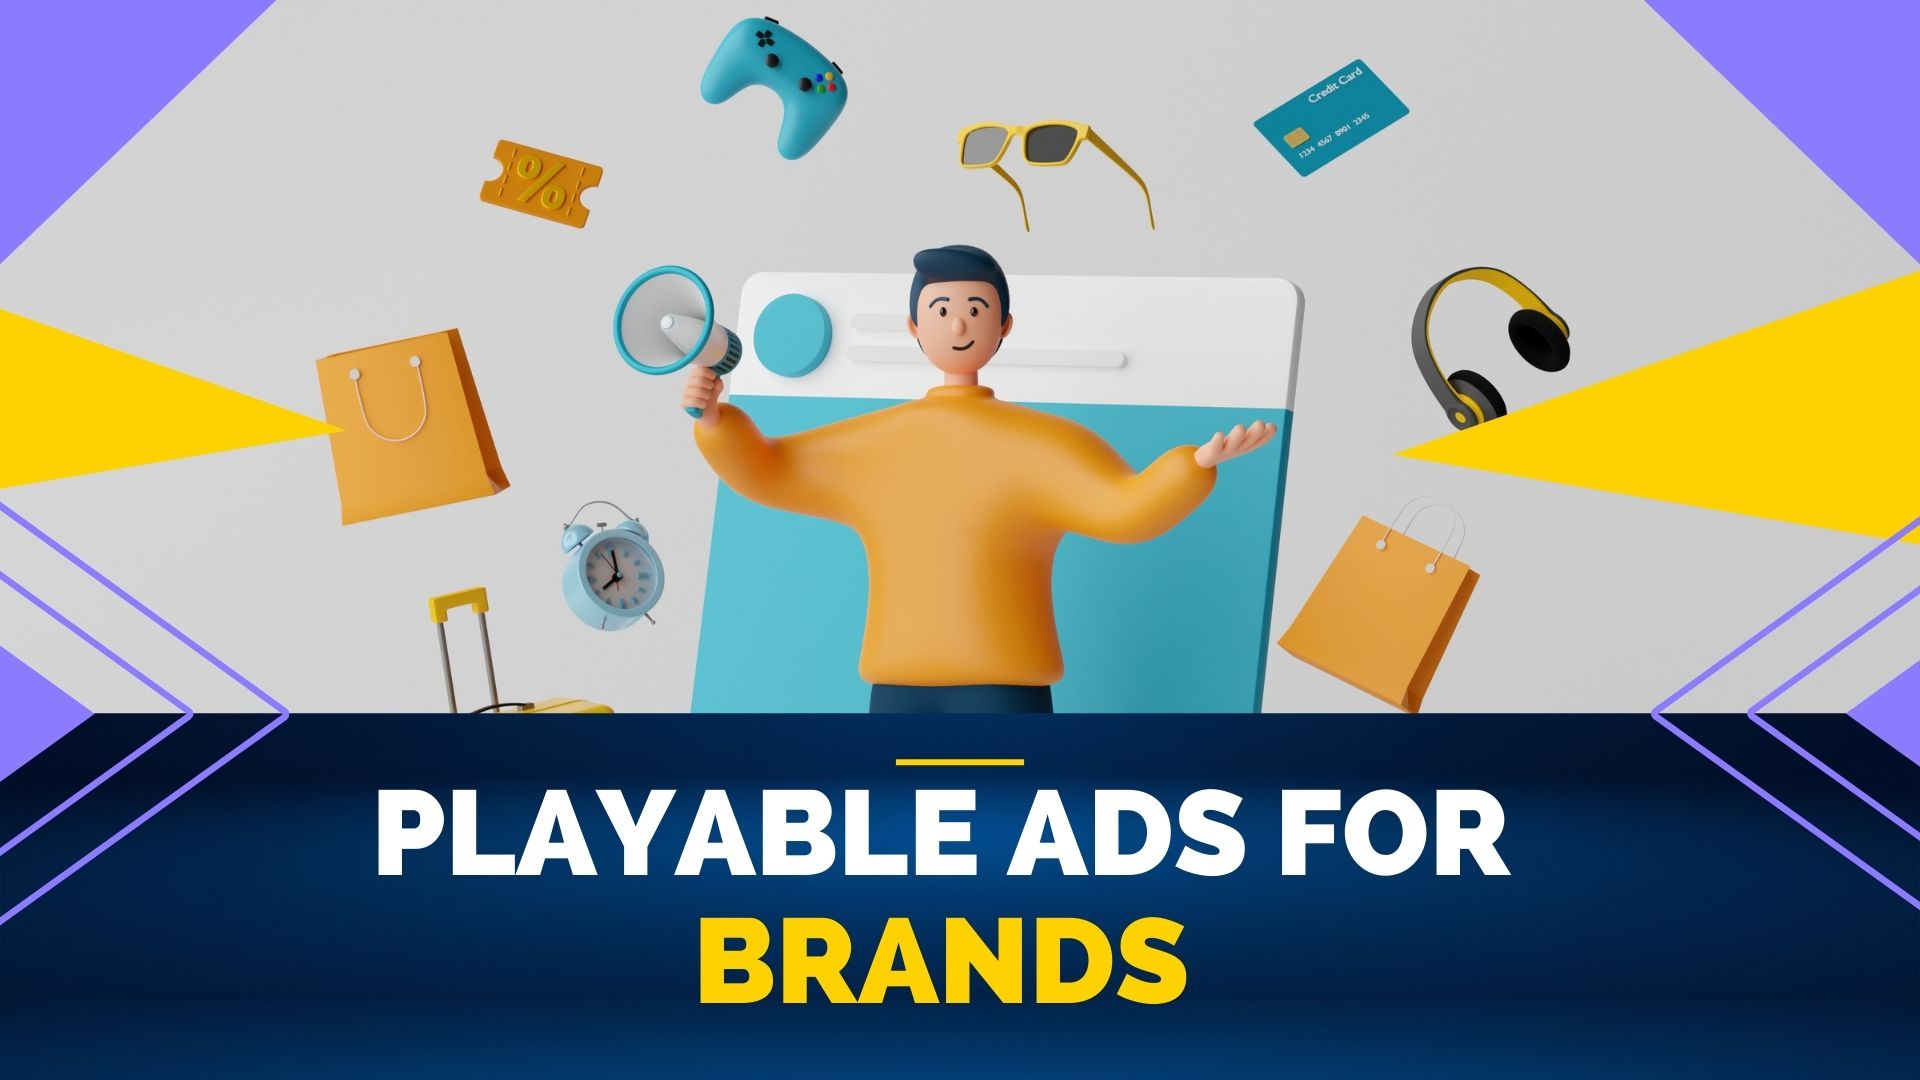 Playable Ads For Brands